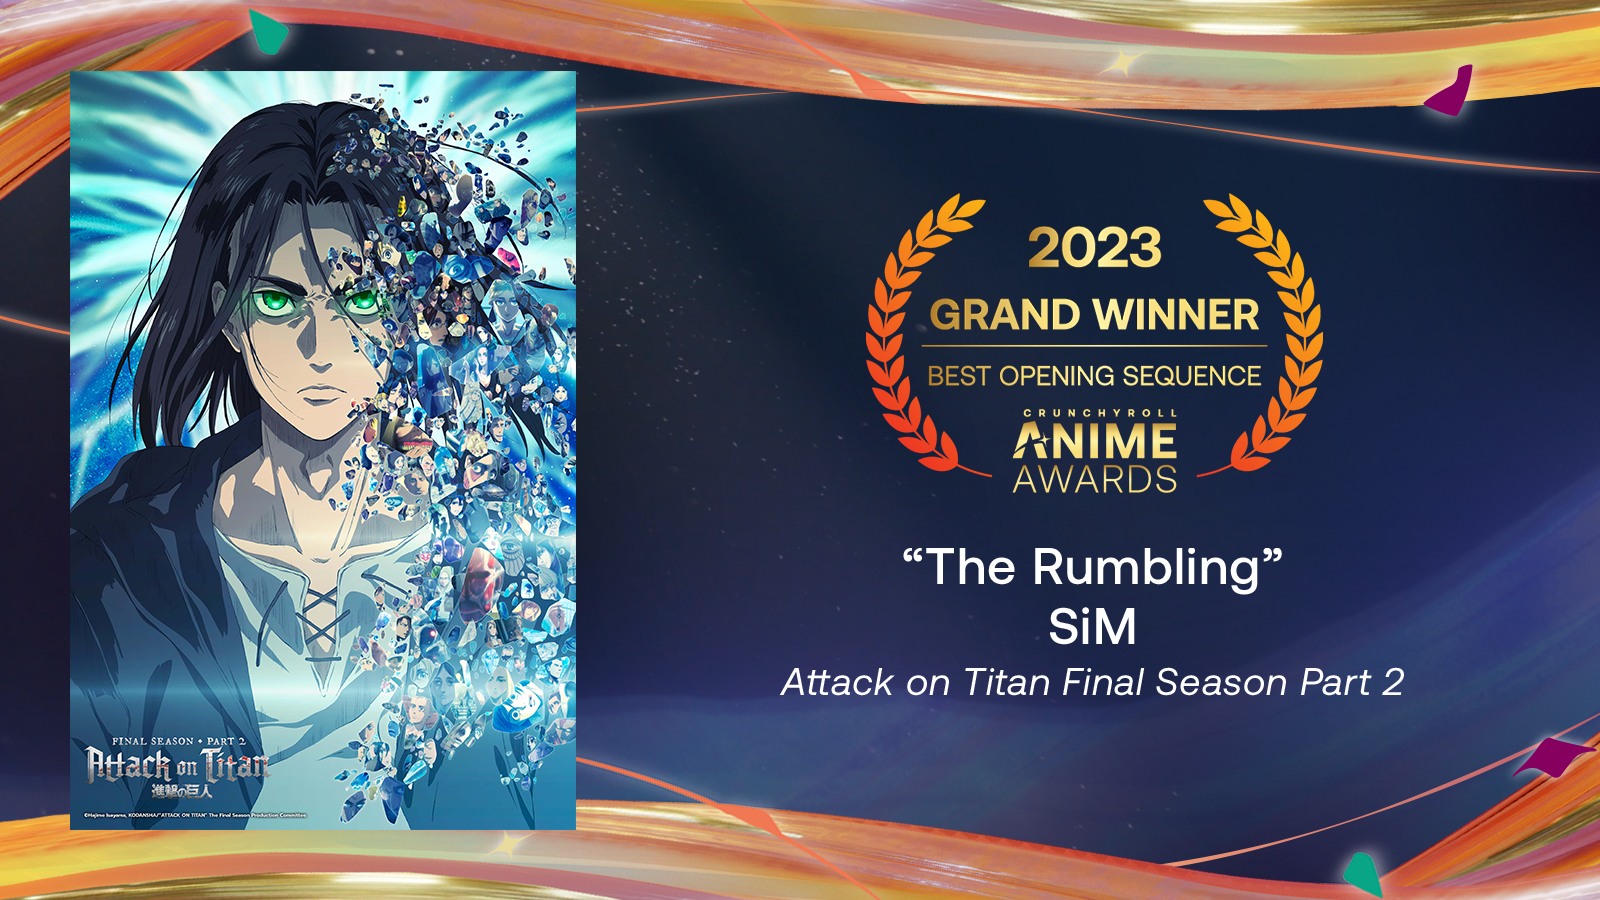 Update 69 funimation anime awards 2023 super hot  incdgdbentre